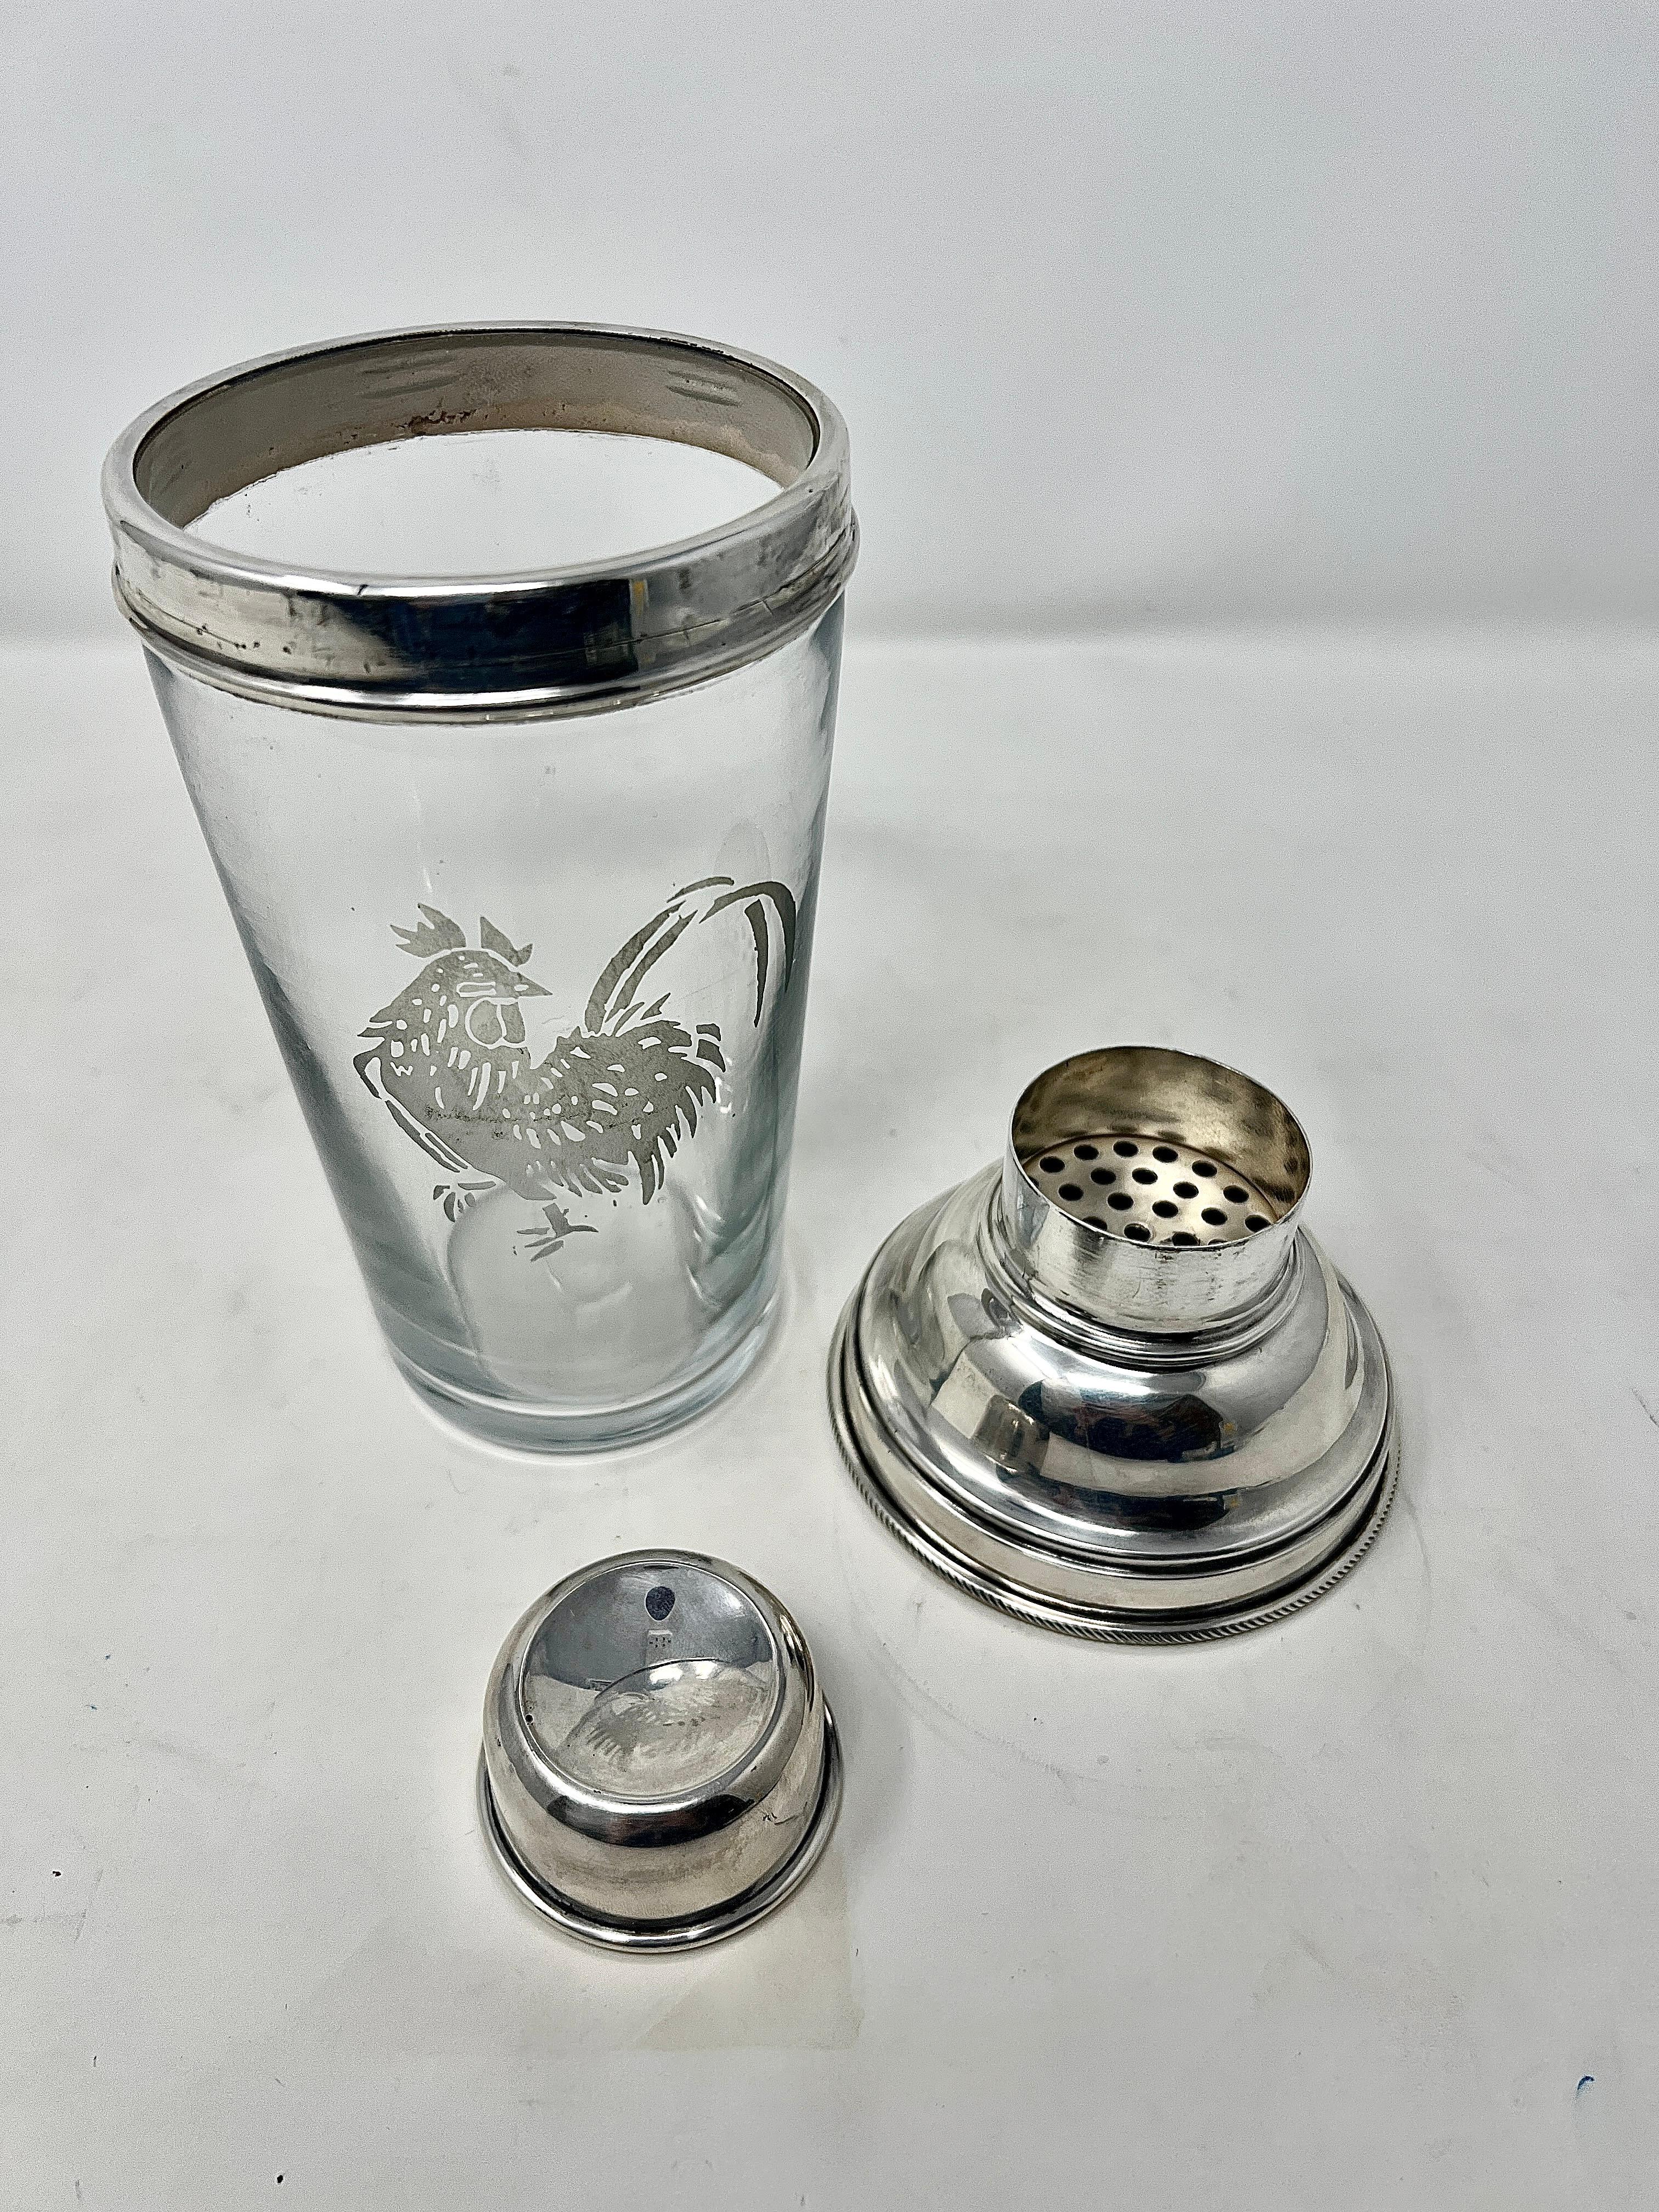 Antique English Art Deco Silver Plate & Etched Glass Rooster Cocktail Shaker, Circa 1920's.